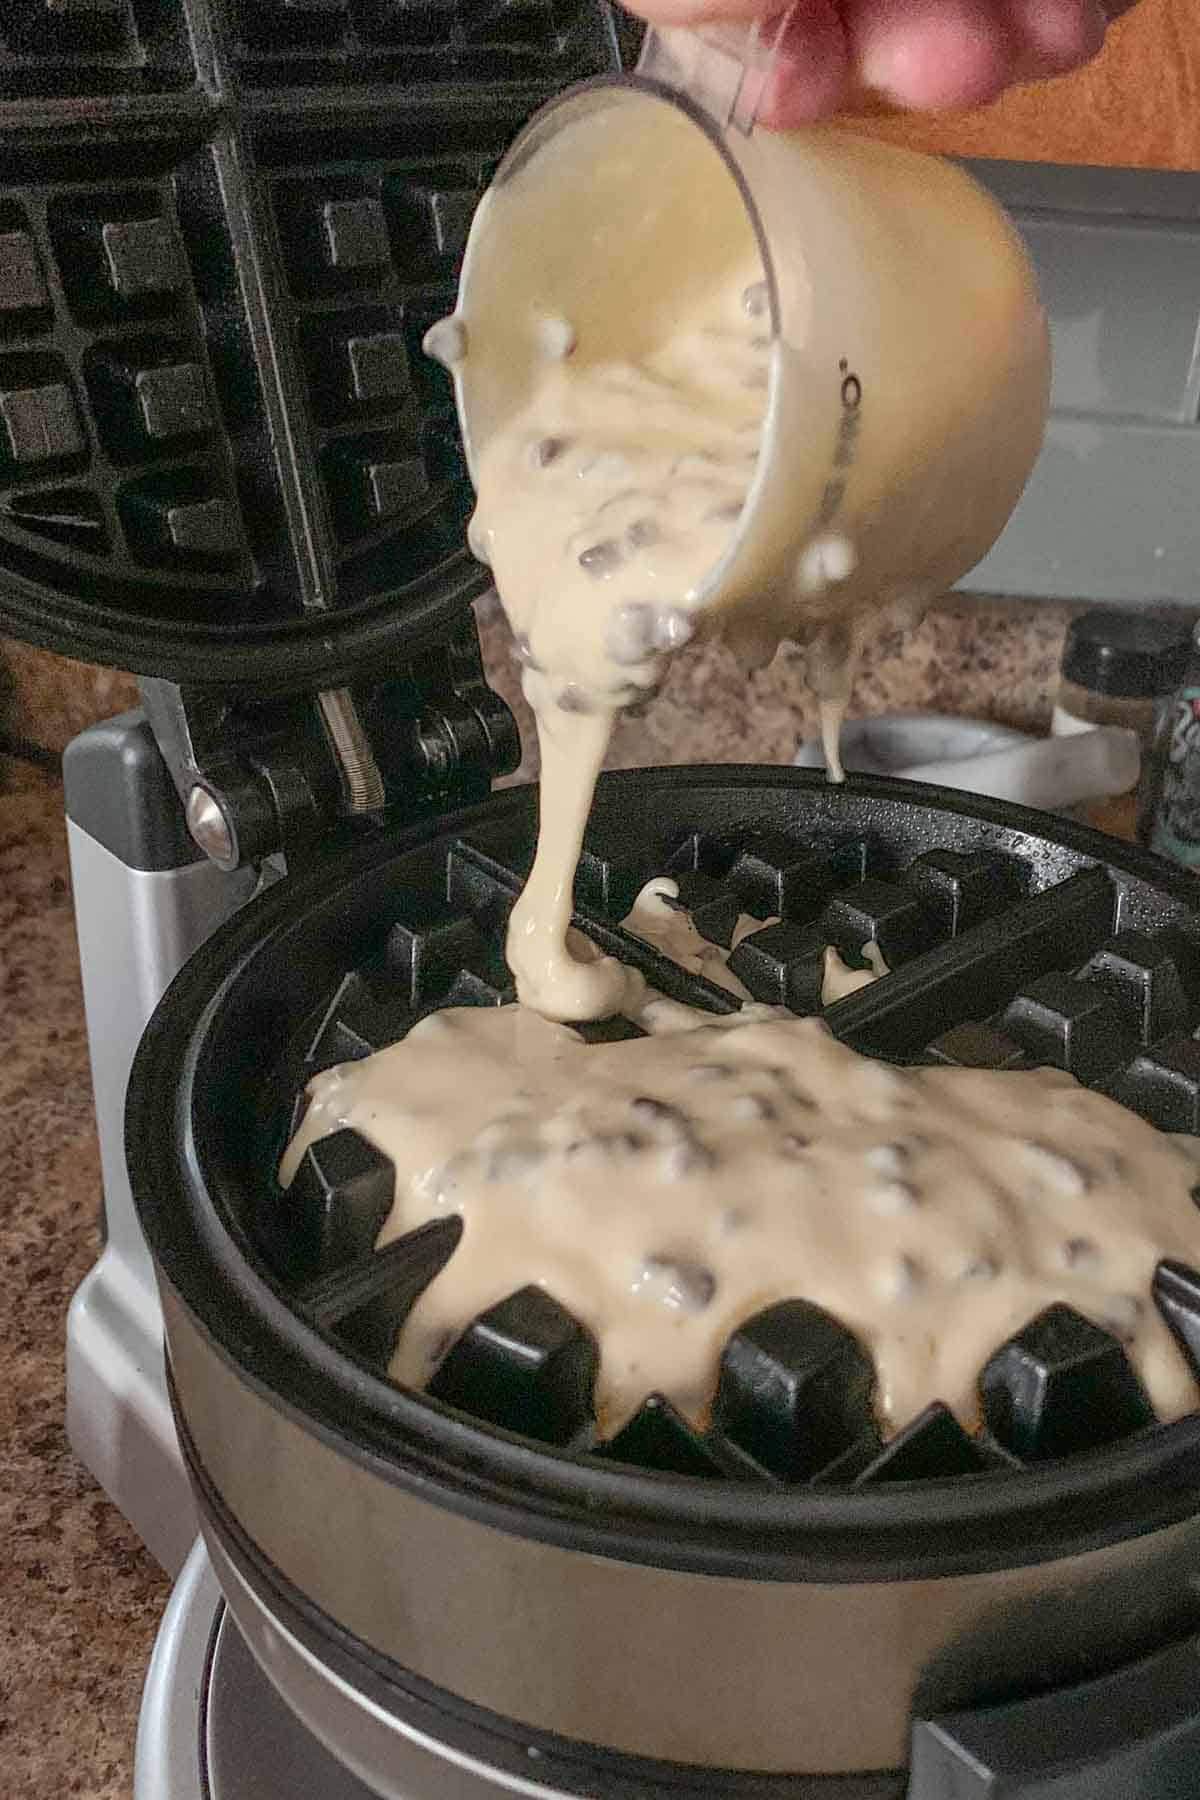 Pouring batter into waffle iron.